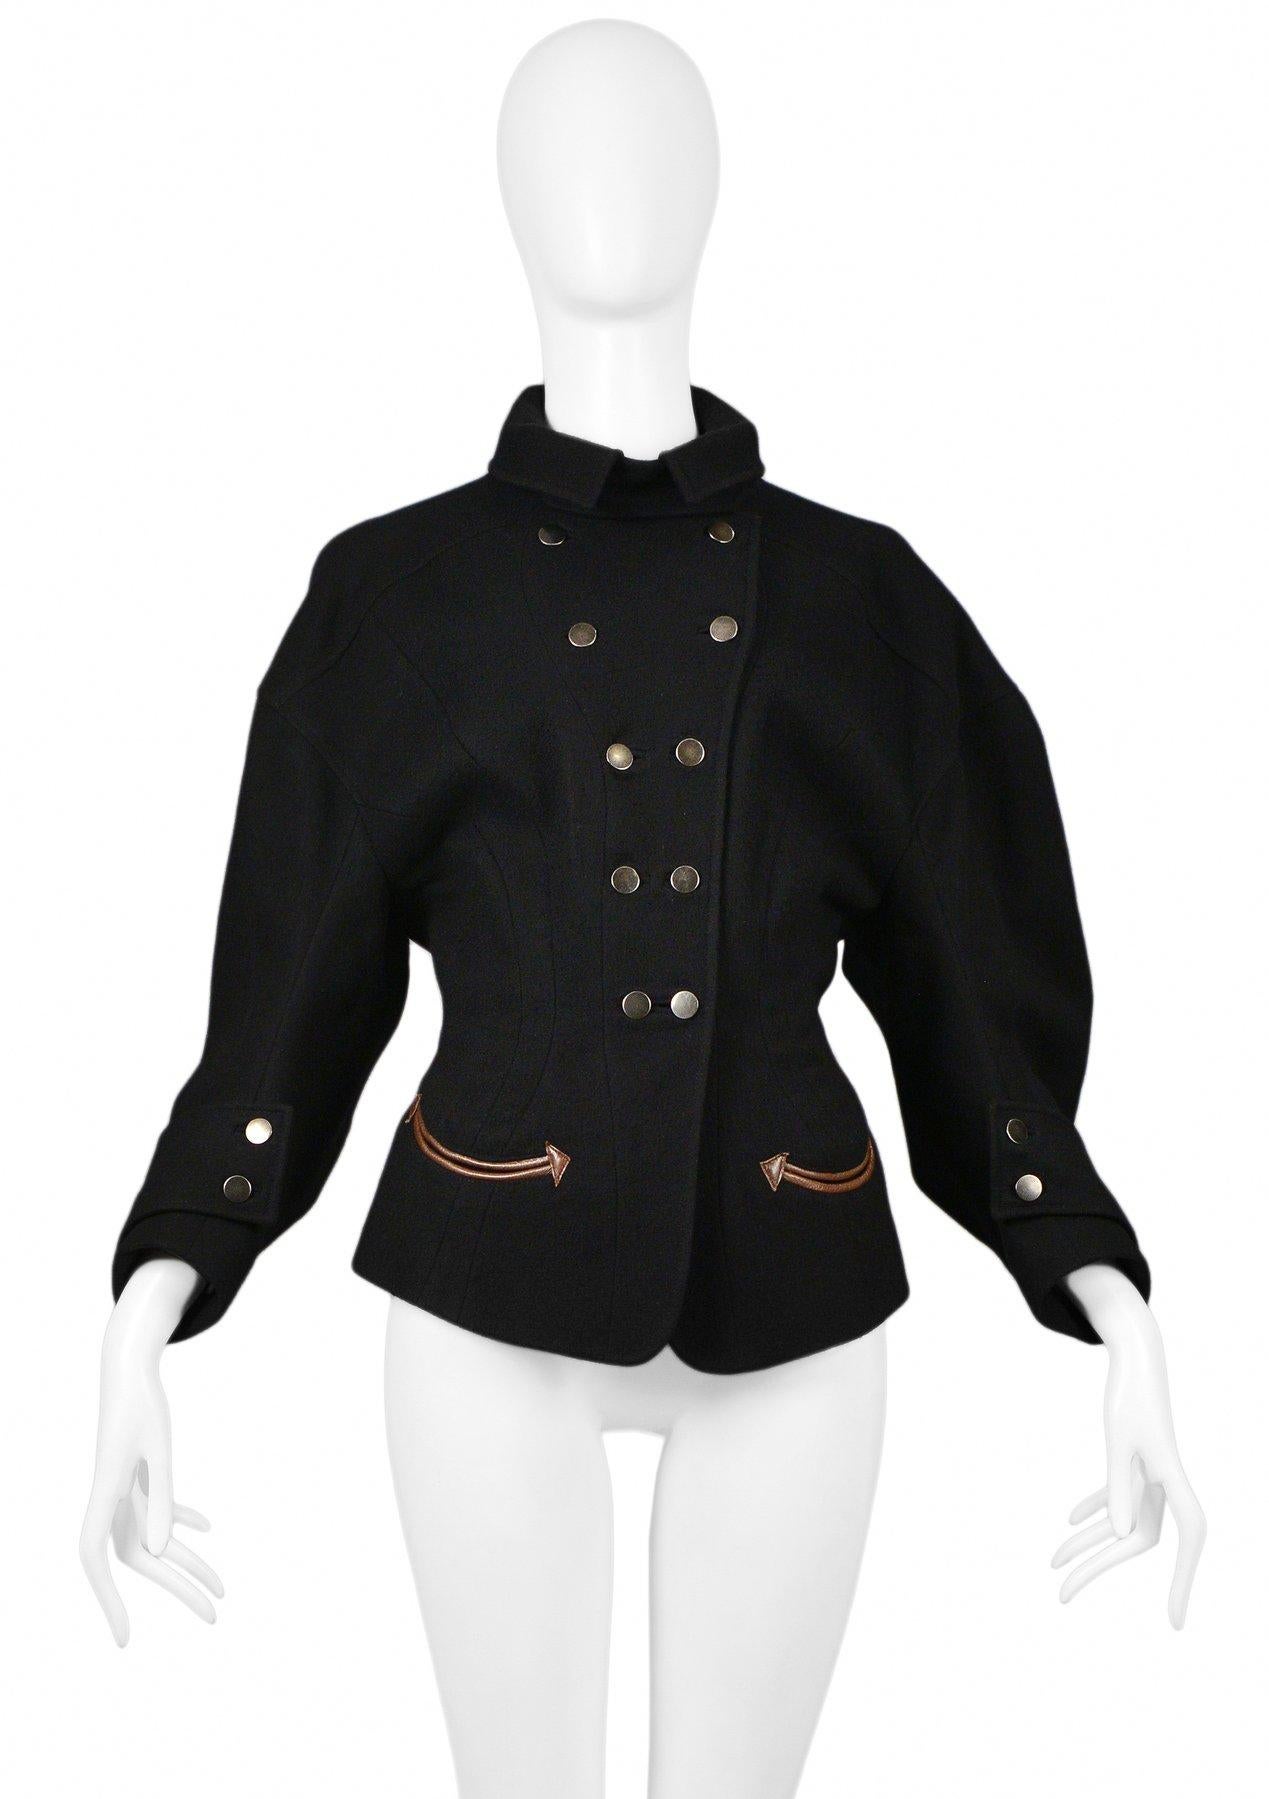 Resurrection is pleased to offer a vintage Balenciaga by Nicolas Ghesquiere black wool double-breasted jacket featuring dramatic full sleeves with snap cuffs, a flap collar, hourglass silhouette, brown leather western-inspired decorative arrow trim